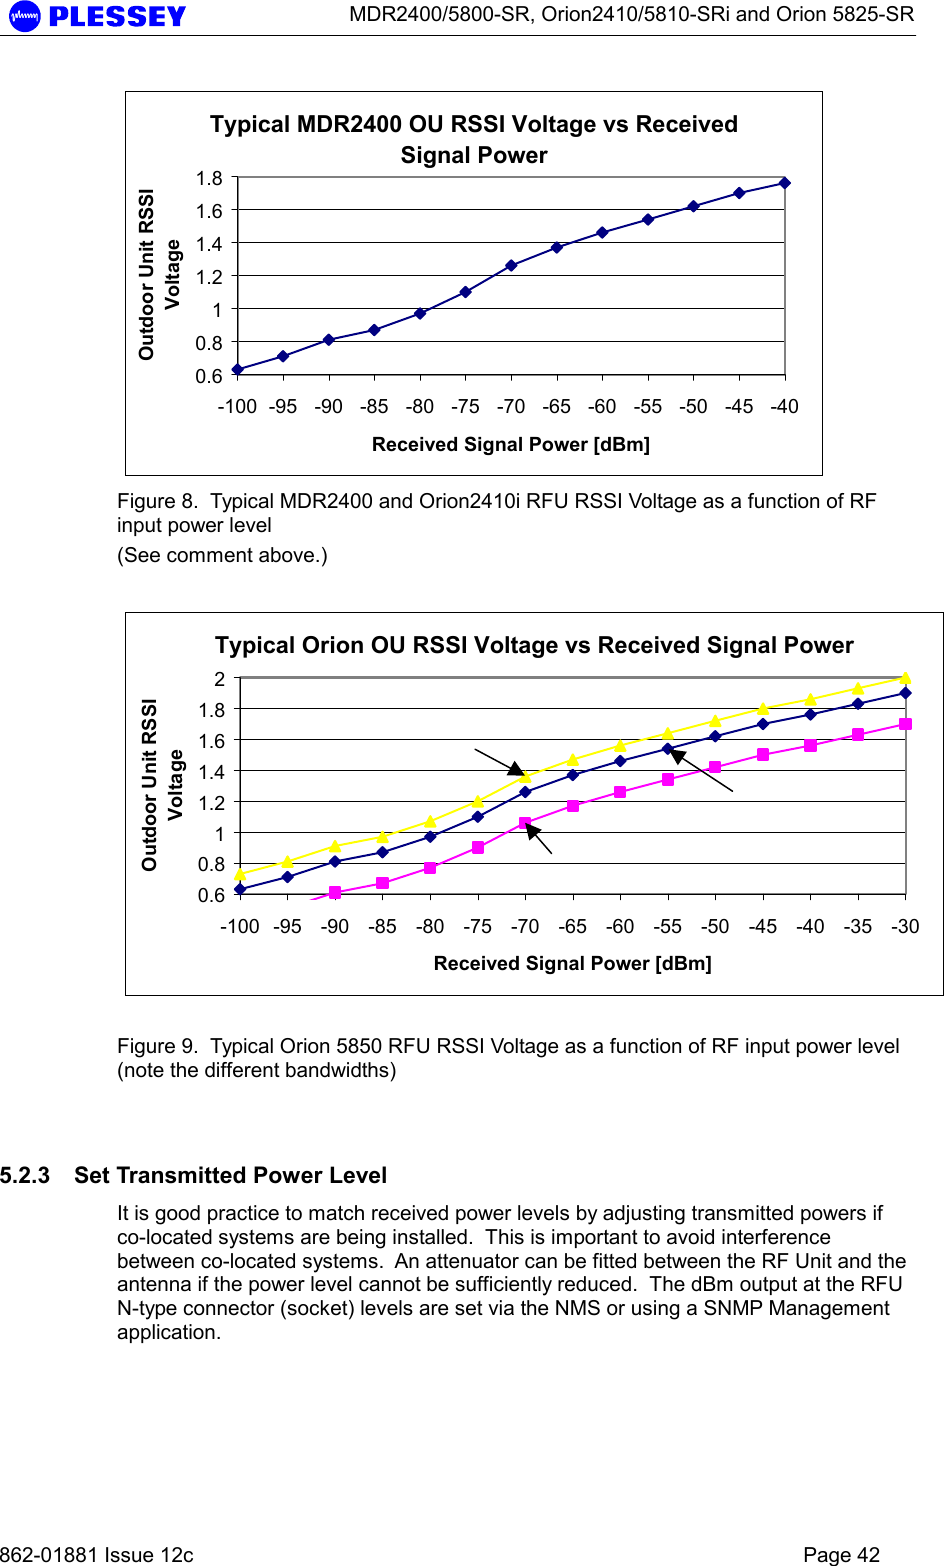      MDR2400/5800-SR, Orion2410/5810-SRi and Orion 5825-SR   862-01881 Issue 12c    Page 42 Typical MDR2400 OU RSSI Voltage vs Received Signal Power0.60.811.21.41.61.8-100 -95 -90 -85 -80 -75 -70 -65 -60 -55 -50 -45 -40Received Signal Power [dBm]Outdoor Unit RSSI Voltage Figure 8.  Typical MDR2400 and Orion2410i RFU RSSI Voltage as a function of RF input power level (See comment above.)  Typical Orion OU RSSI Voltage vs Received Signal Power0.60.811.21.41.61.82-100 -95 -90 -85 -80 -75 -70 -65 -60 -55 -50 -45 -40 -35 -30Received Signal Power [dBm]Outdoor Unit RSSI Voltage Figure 9.  Typical Orion 5850 RFU RSSI Voltage as a function of RF input power level (note the different bandwidths)  5.2.3  Set Transmitted Power Level It is good practice to match received power levels by adjusting transmitted powers if co-located systems are being installed.  This is important to avoid interference between co-located systems.  An attenuator can be fitted between the RF Unit and the antenna if the power level cannot be sufficiently reduced.  The dBm output at the RFU N-type connector (socket) levels are set via the NMS or using a SNMP Management application. 